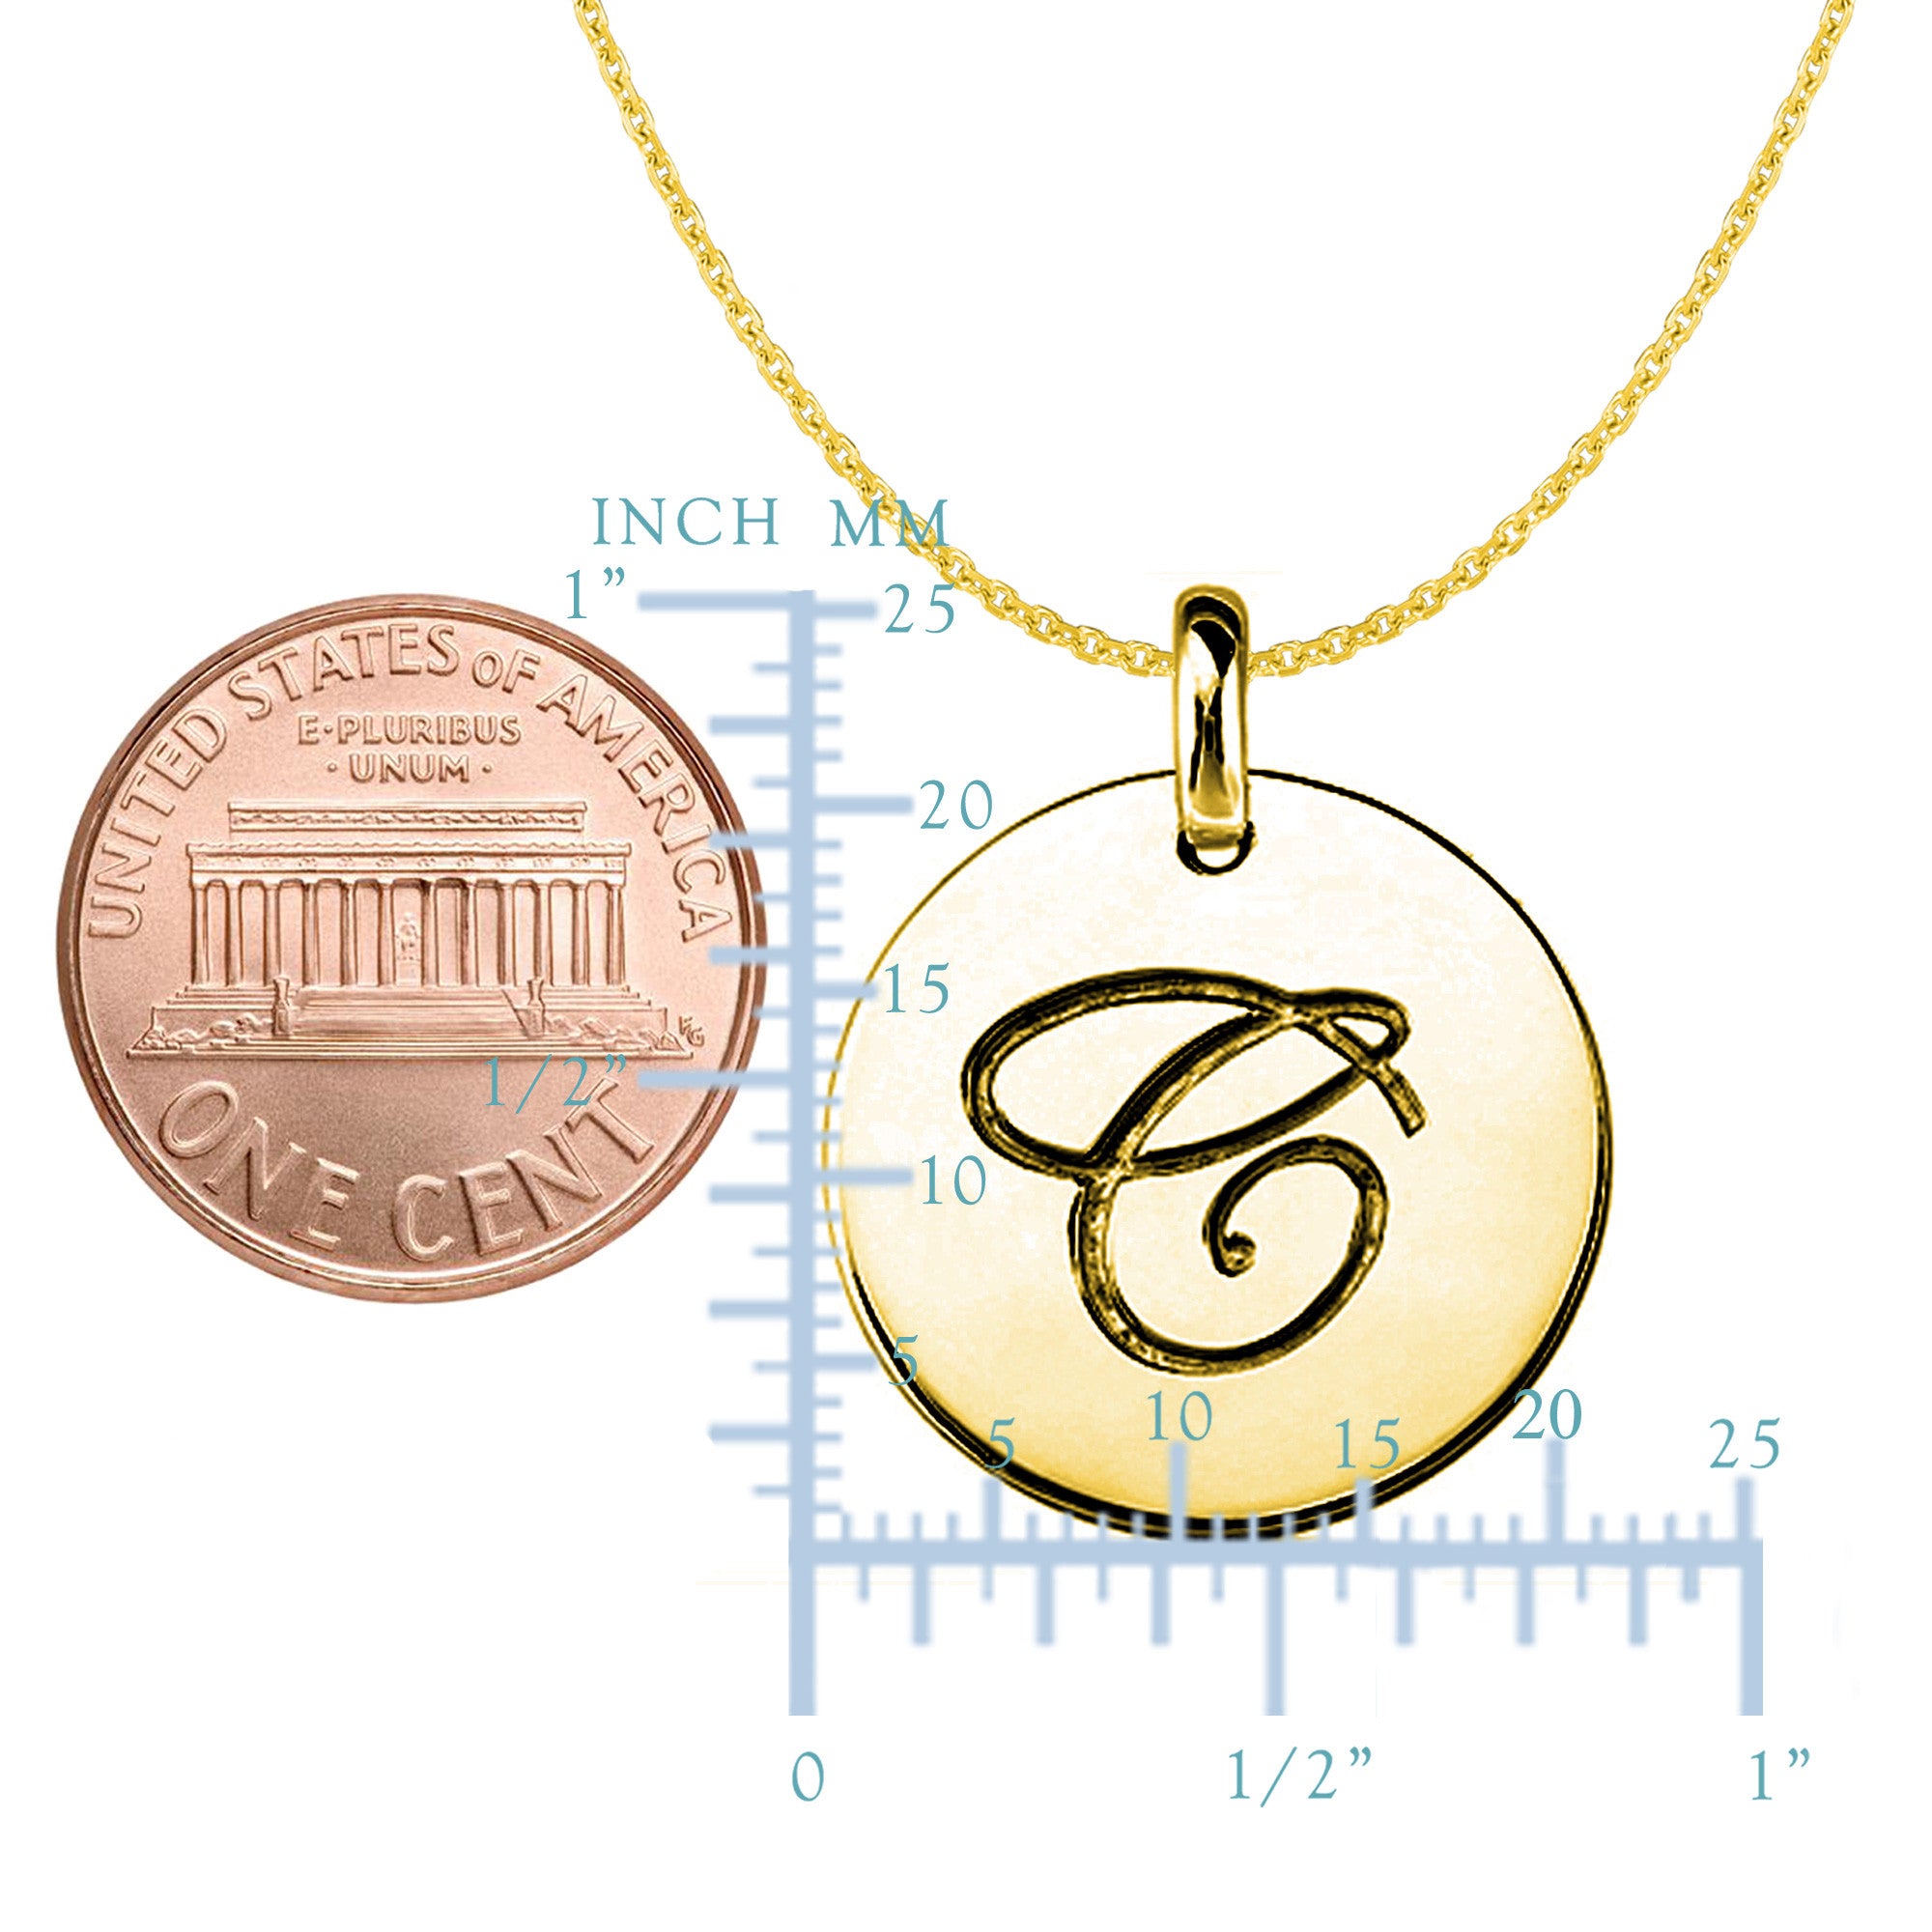 "C" 14K Yellow Gold Script Engraved Initial Disk Pendant fine designer jewelry for men and women